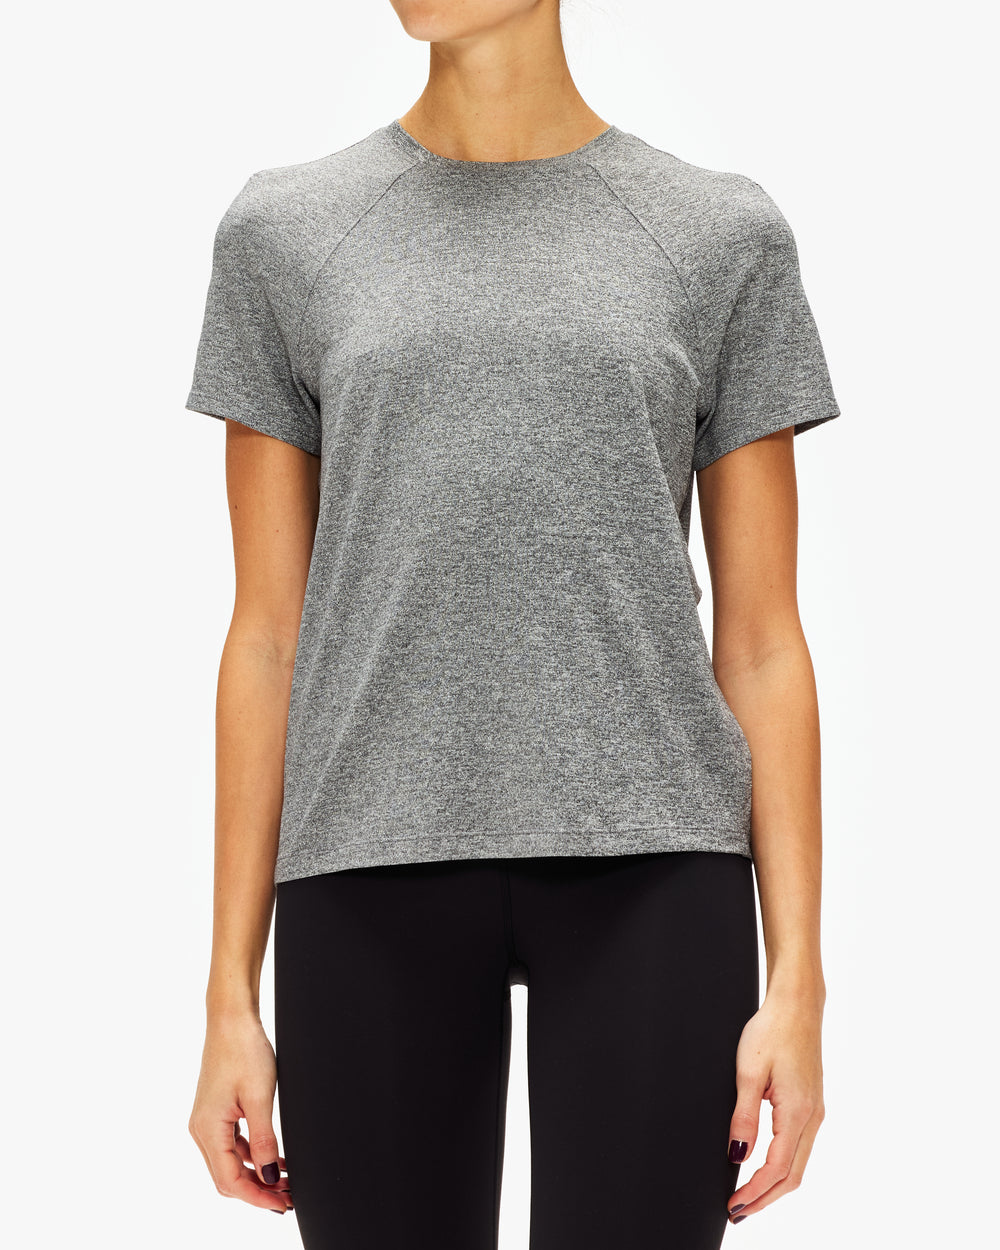 Lululemon License To Train Jogger – The Shop at Equinox